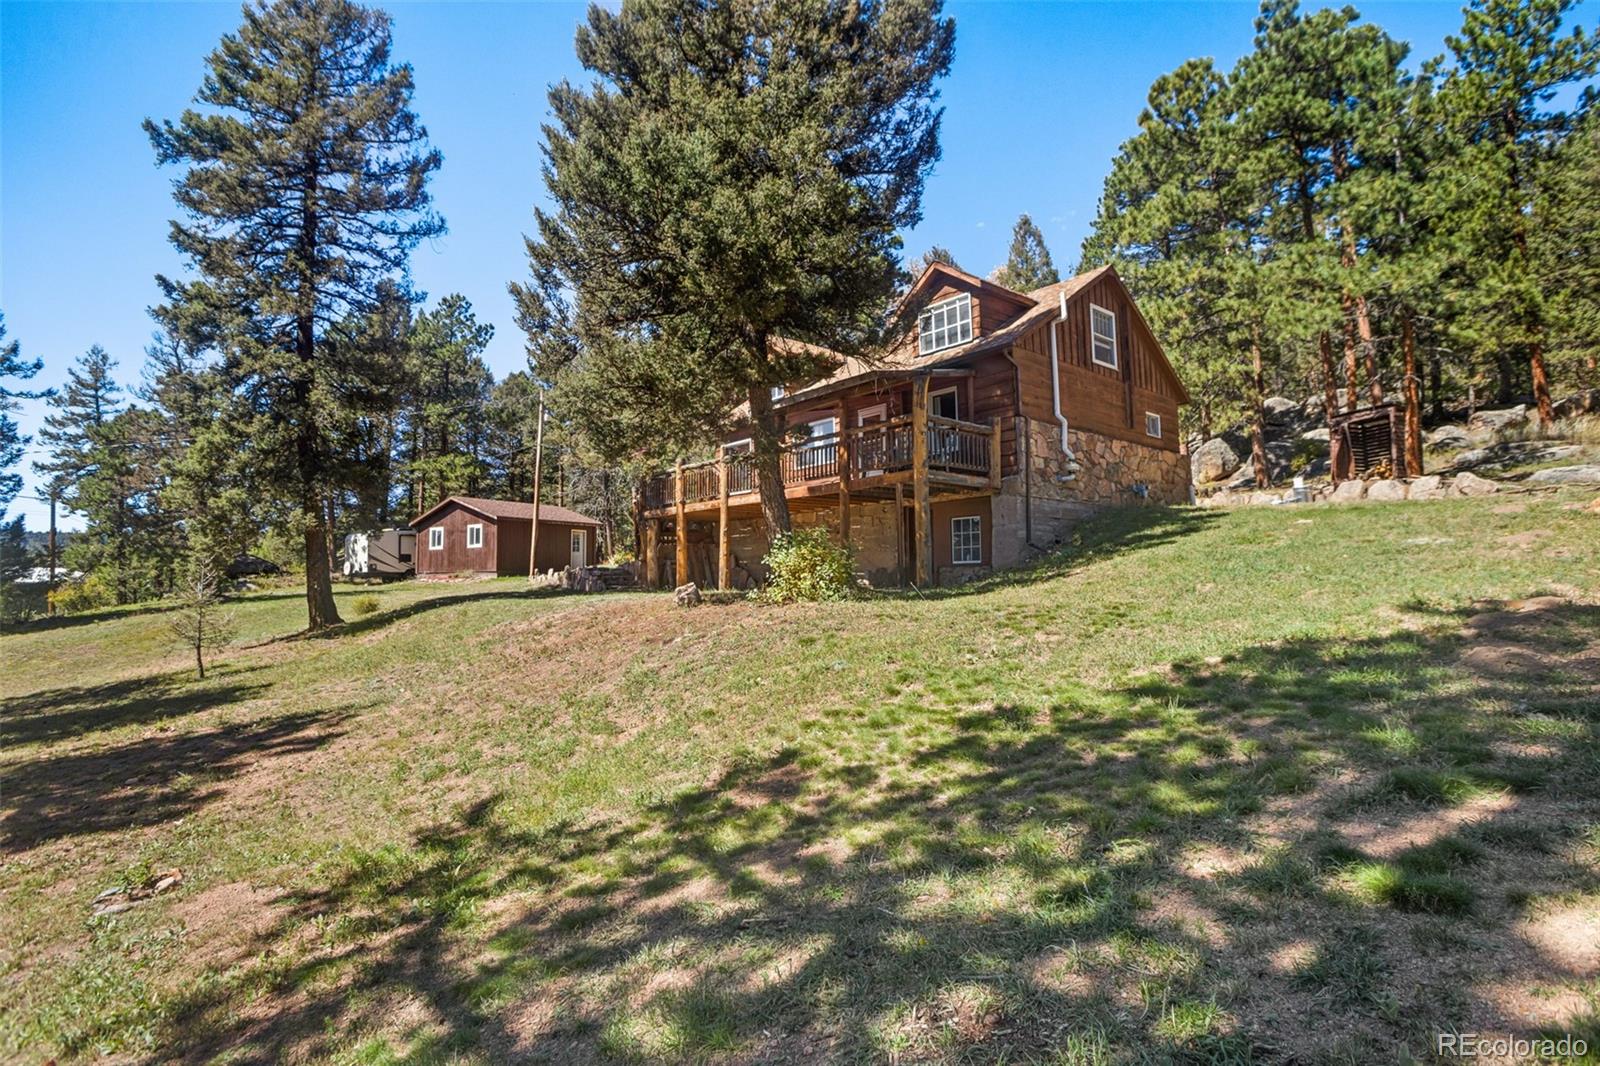 11595 s us hwy 285 frontage road, Conifer sold home. Closed on 2023-12-19 for $580,000.